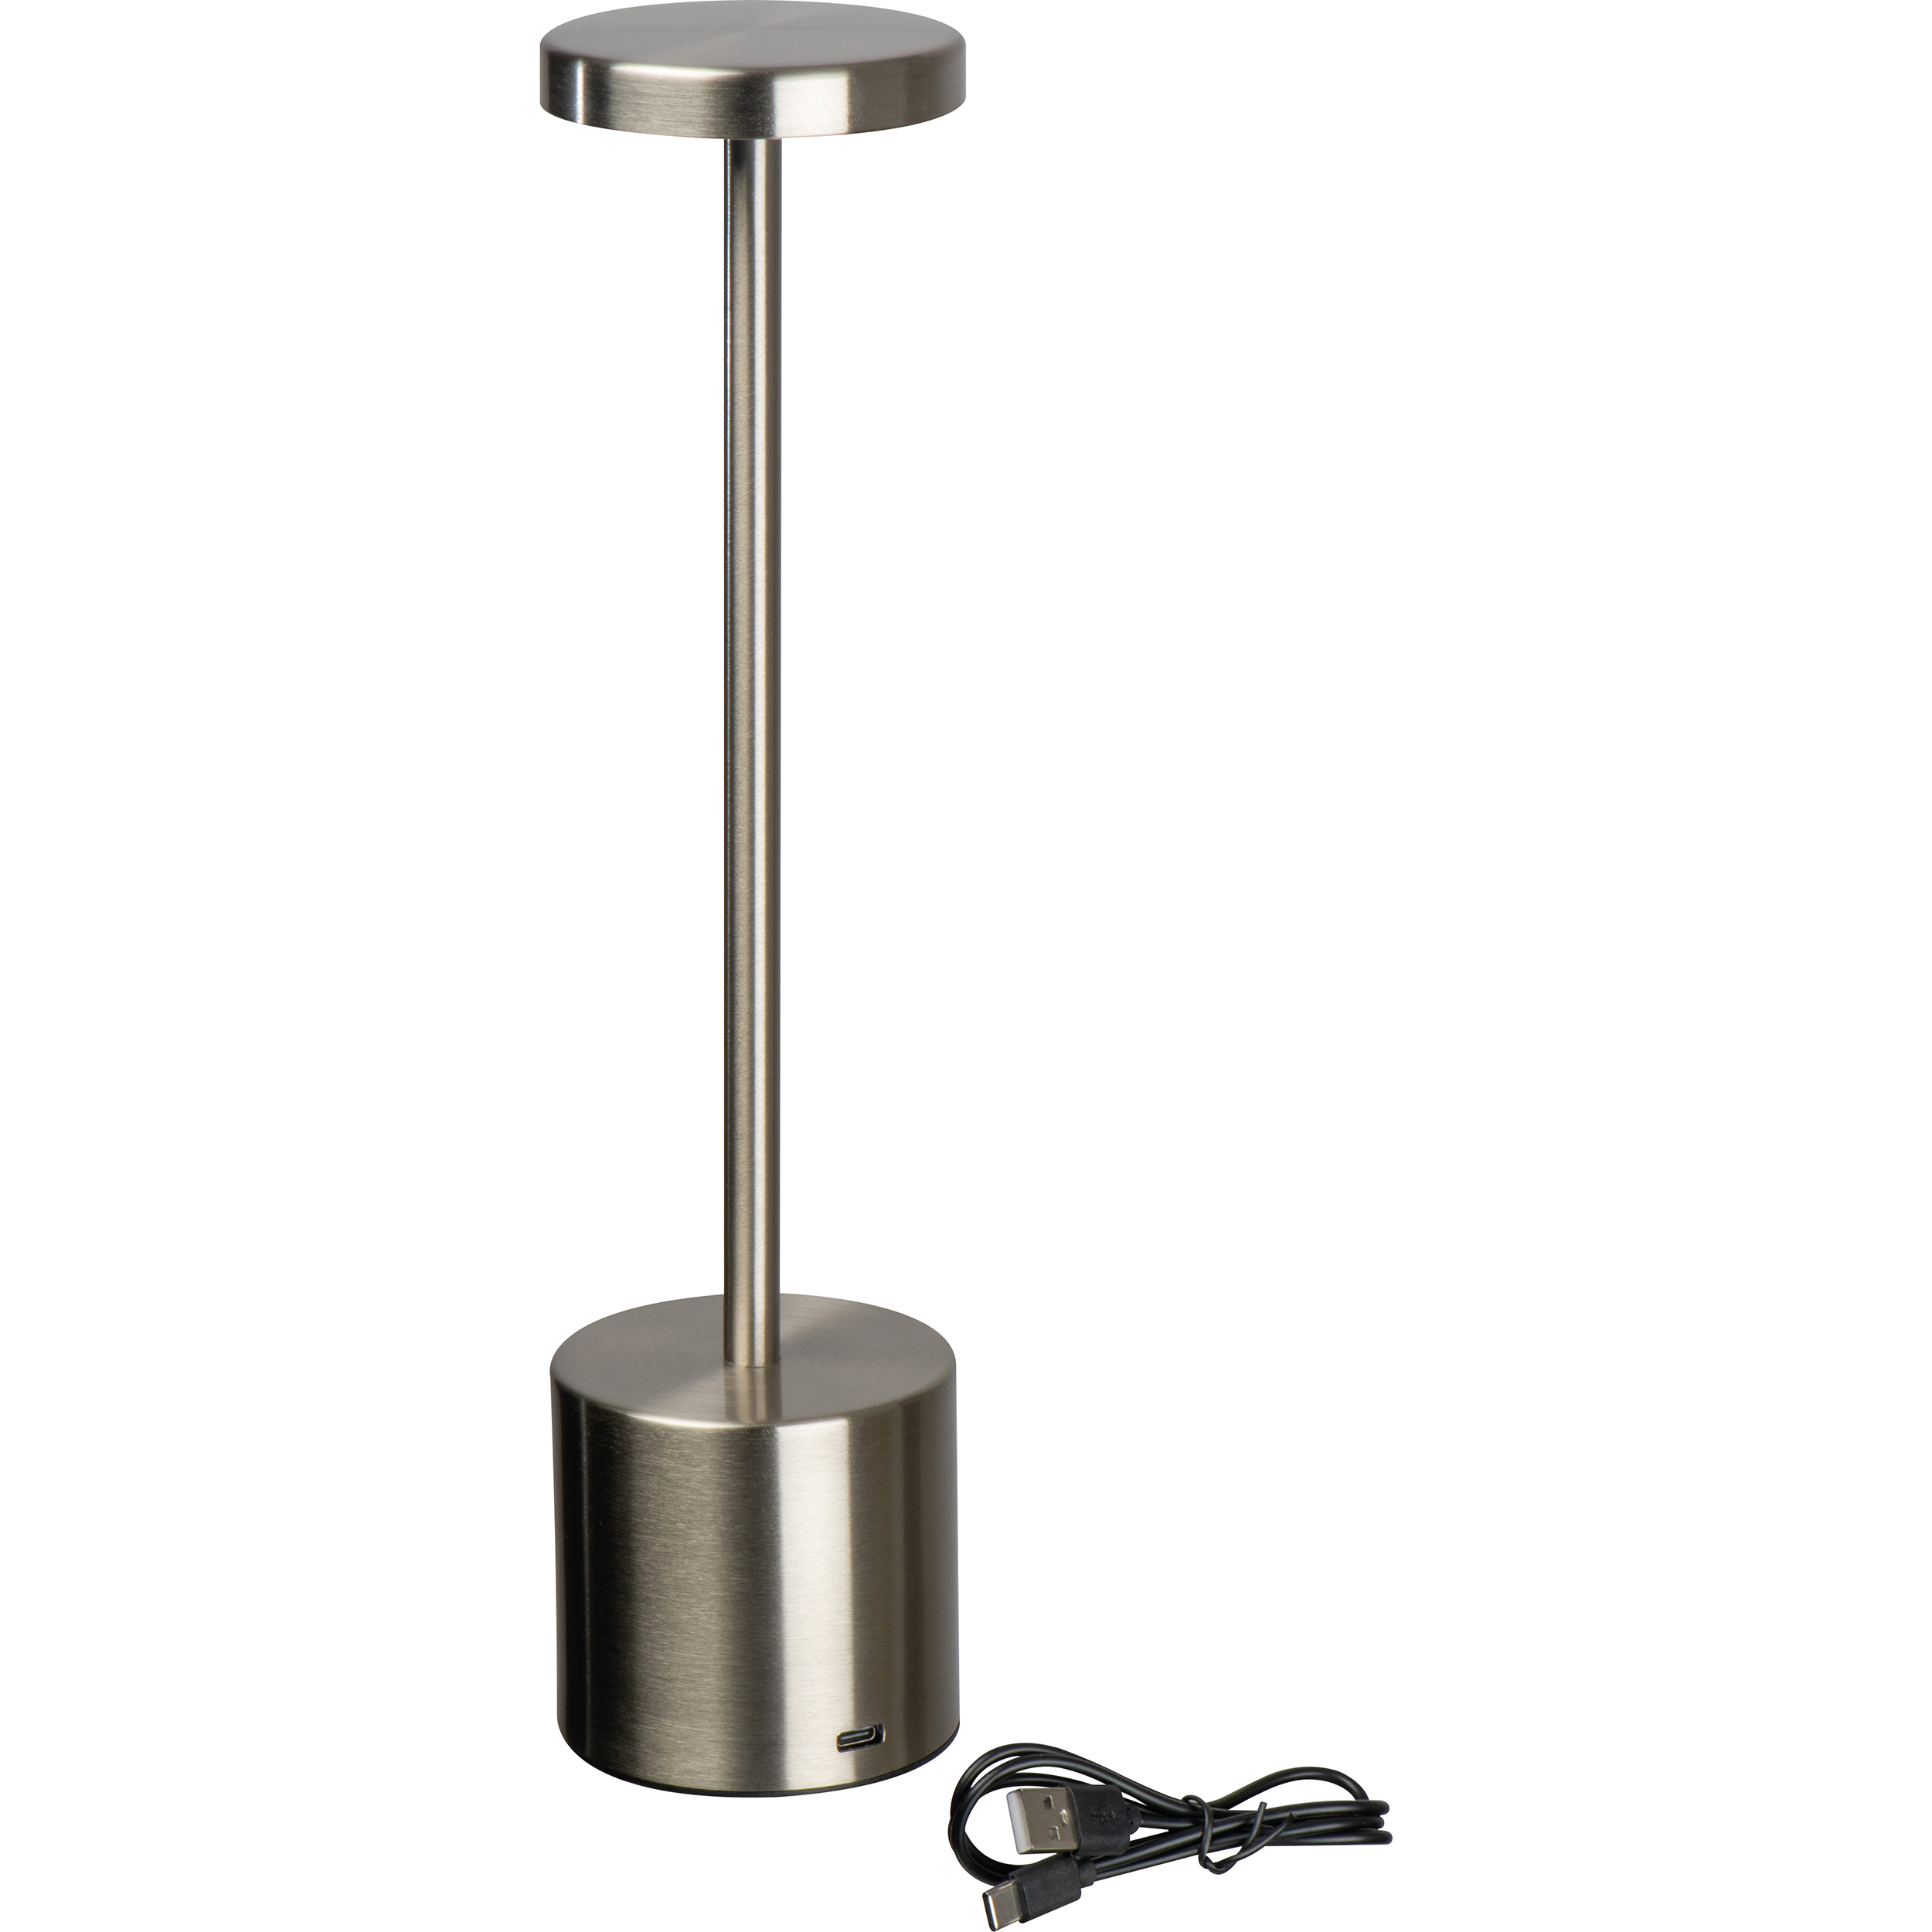 Stainless steel table lamp with rechargeable battery - Yalding